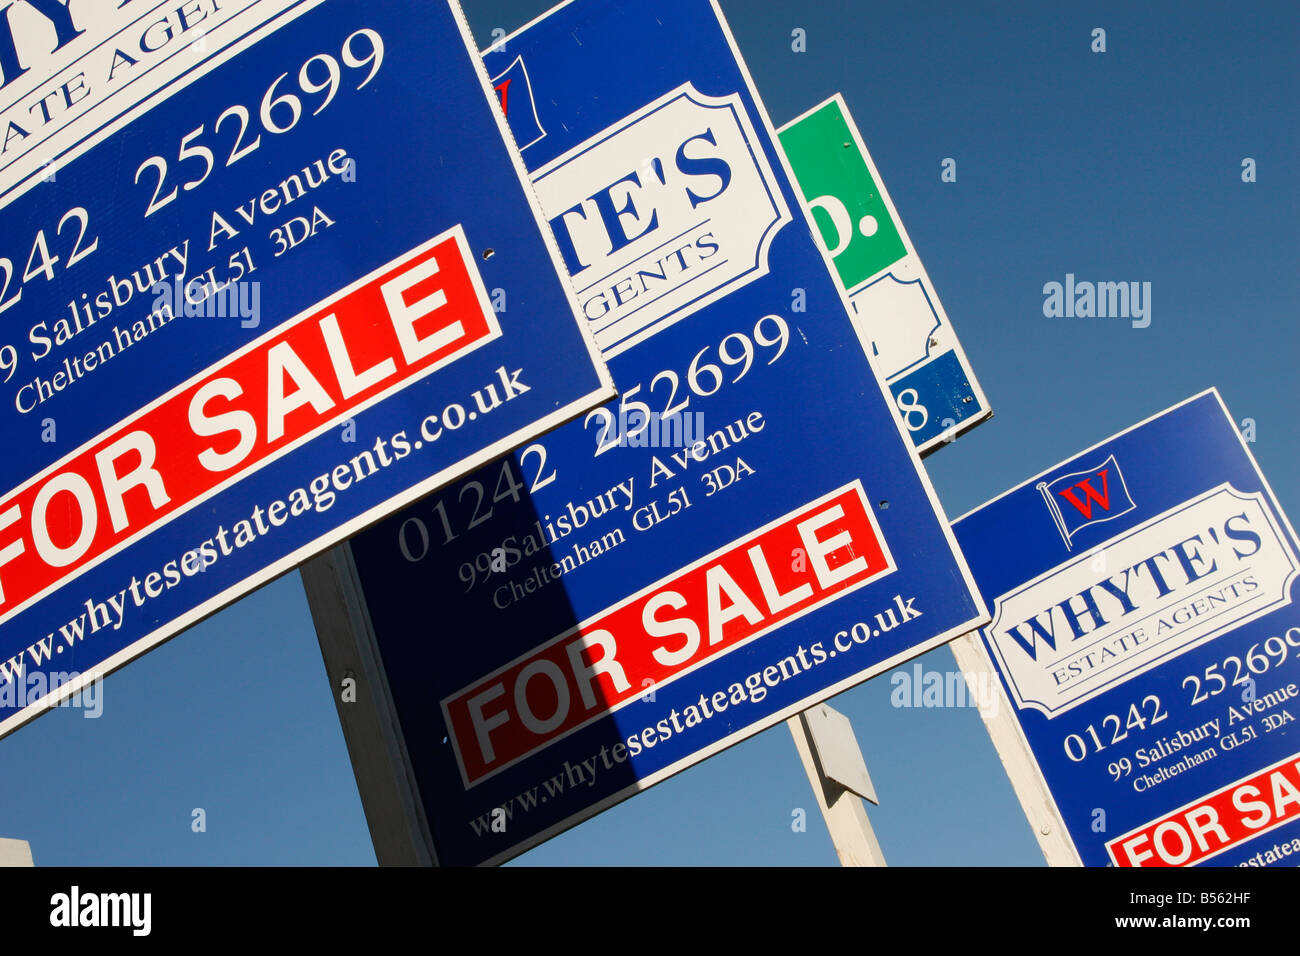 Property for sale signs in the UK Stock Photo